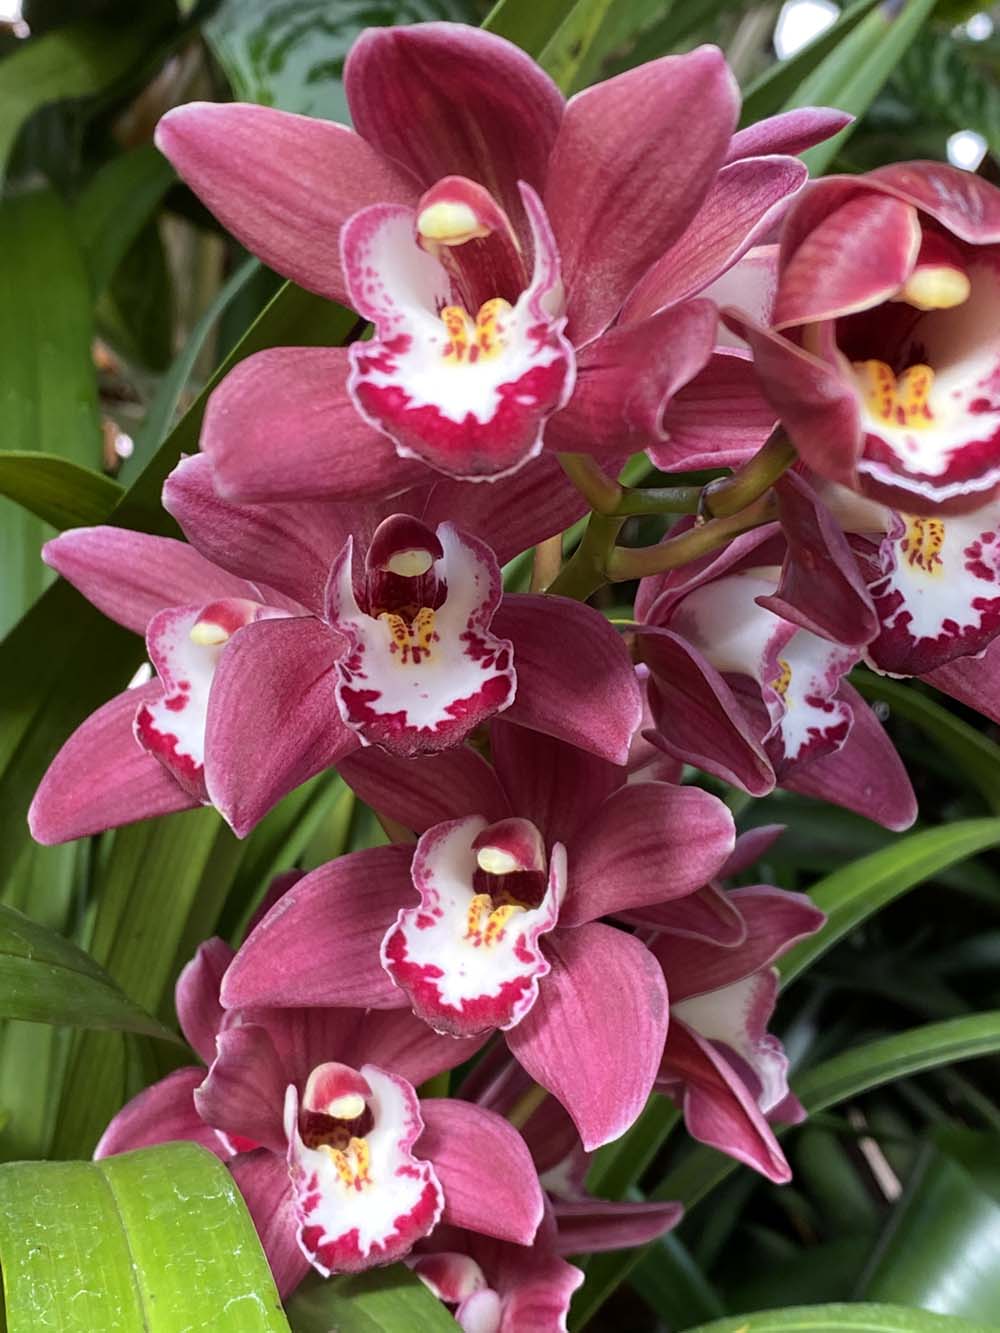 Stem of a cymbidium hybrid orchid covered in mauve-colored blooms with white centers